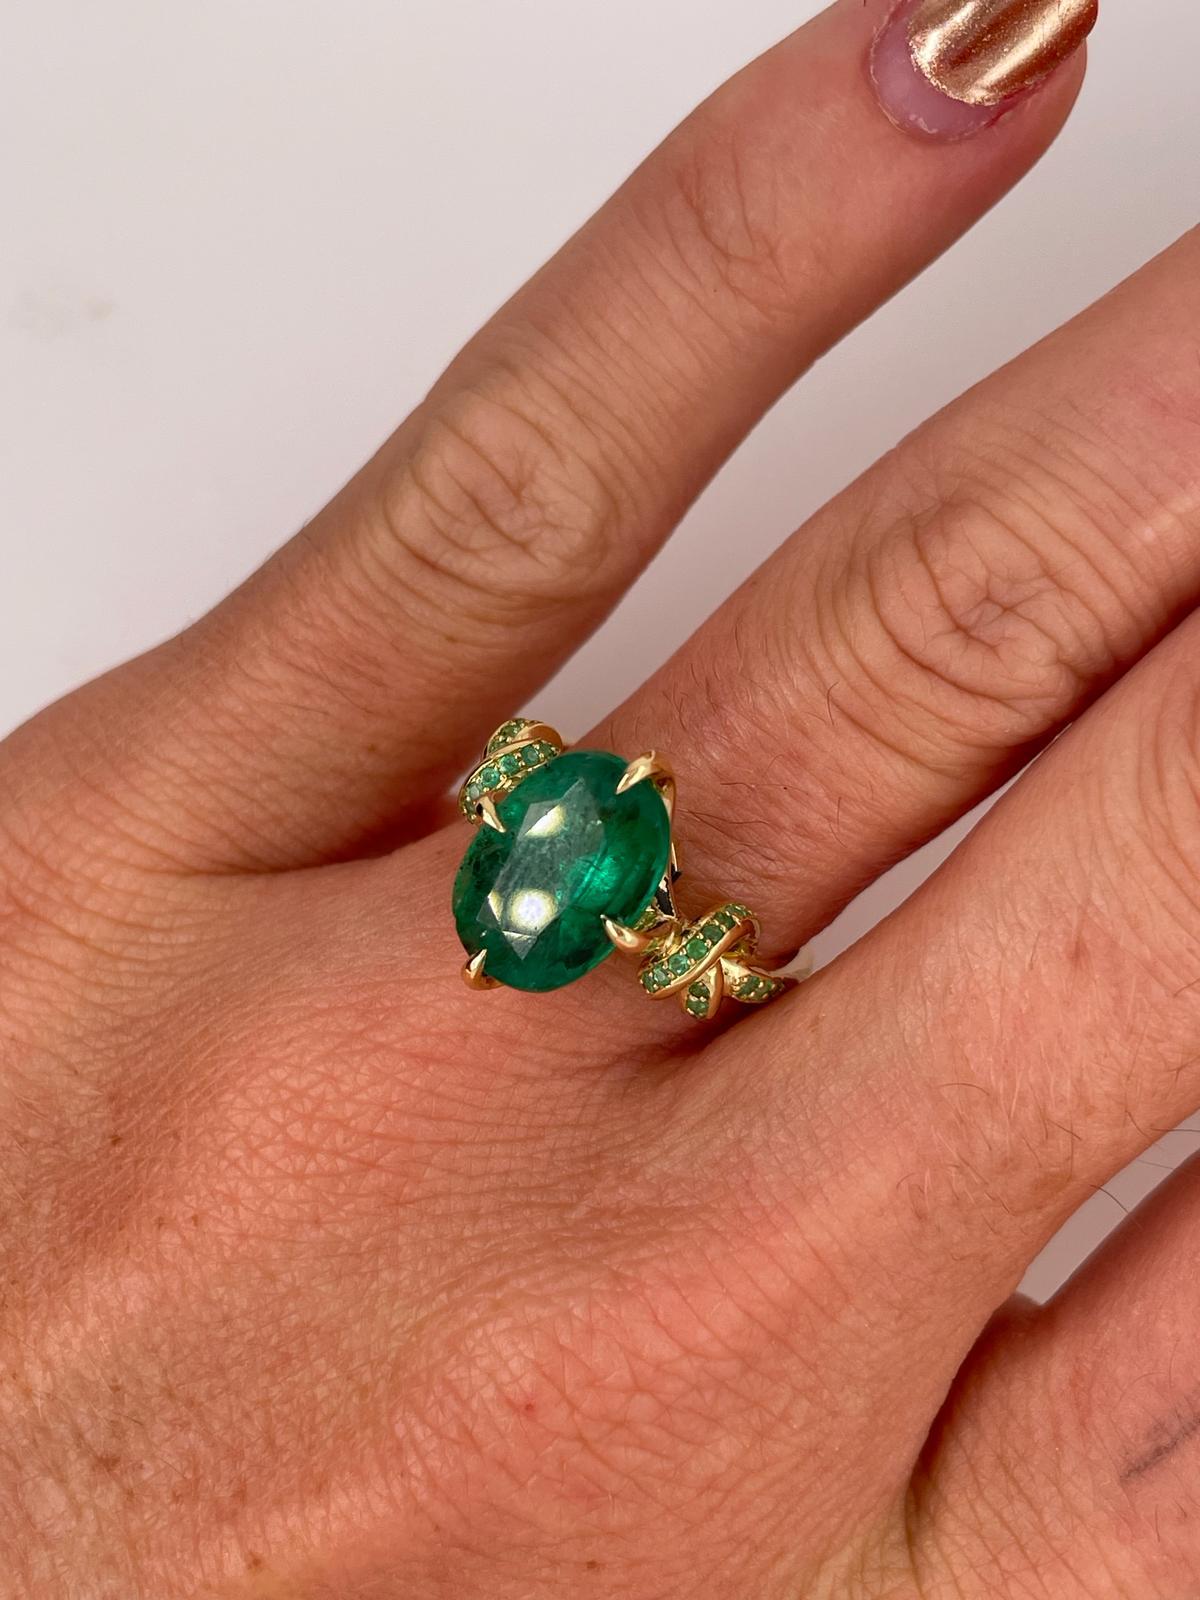 Artist 4.01ct Emerald Oval Cut Forget Me Knot Ring in 18Carat Yellow Gold with Emeralds For Sale